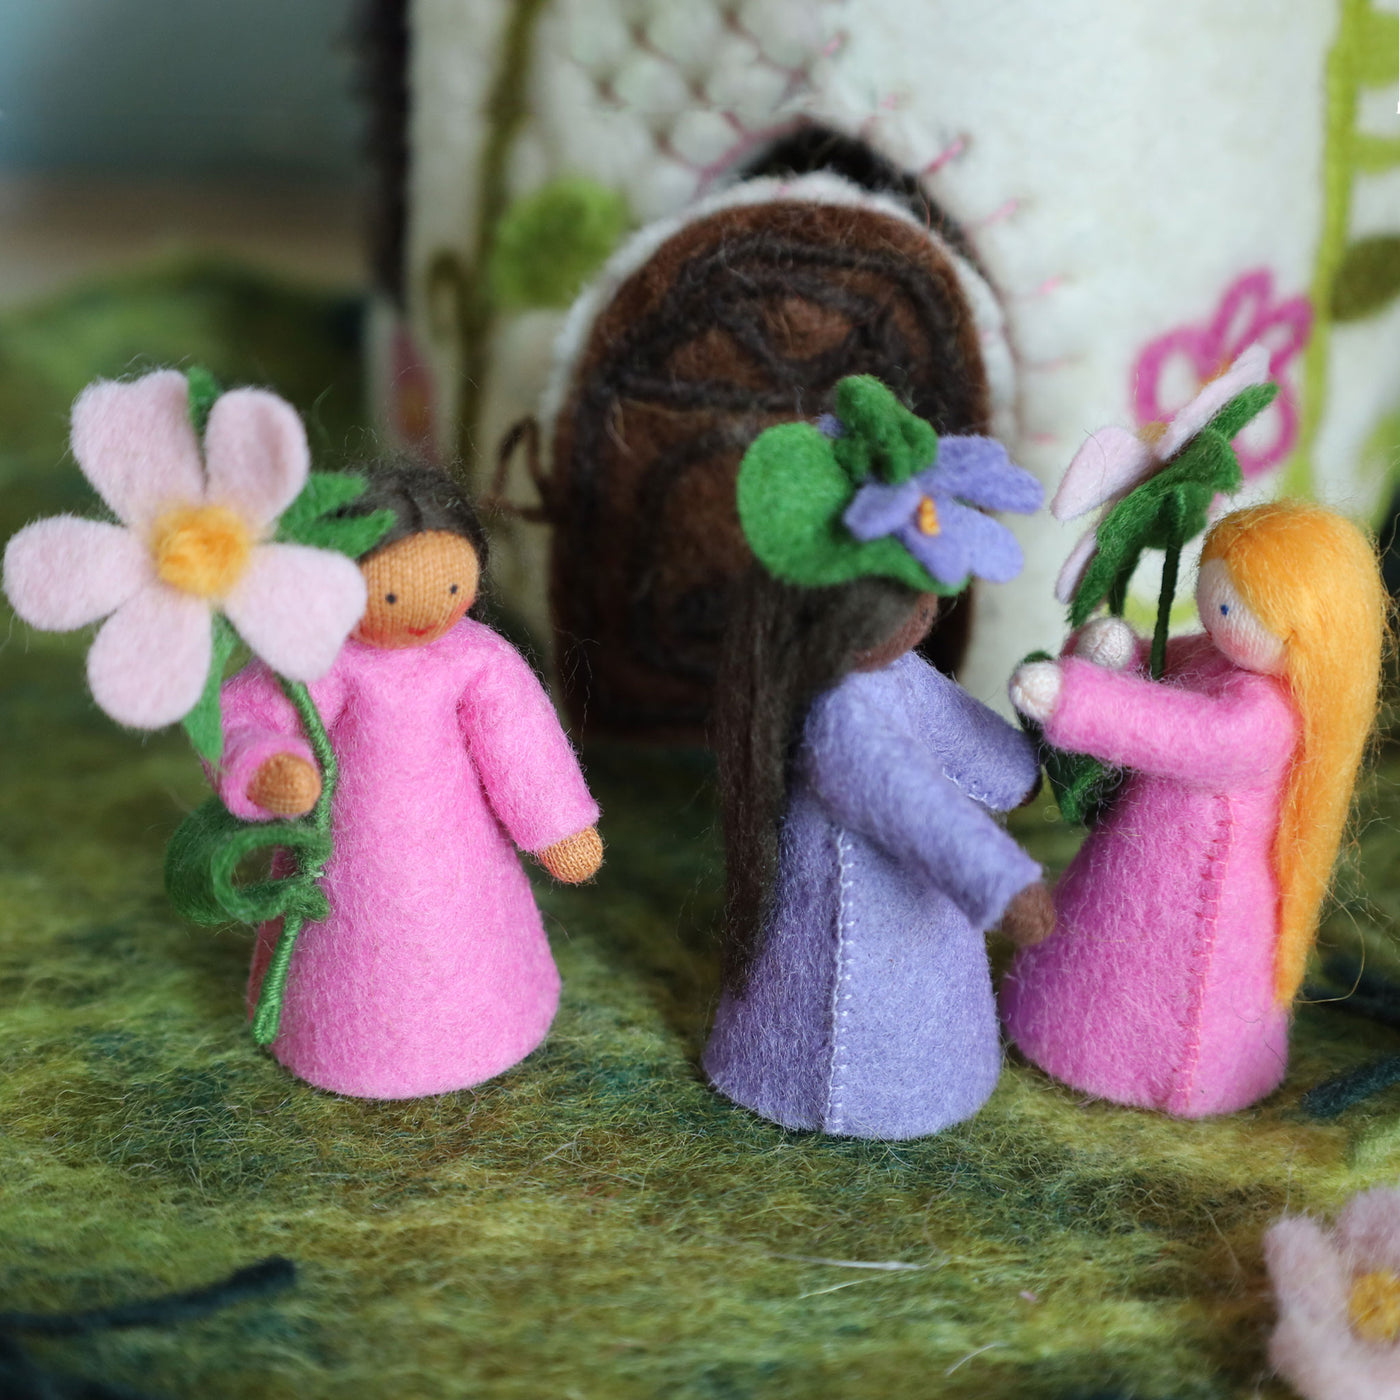 Pink Flower Fairy House and Mat